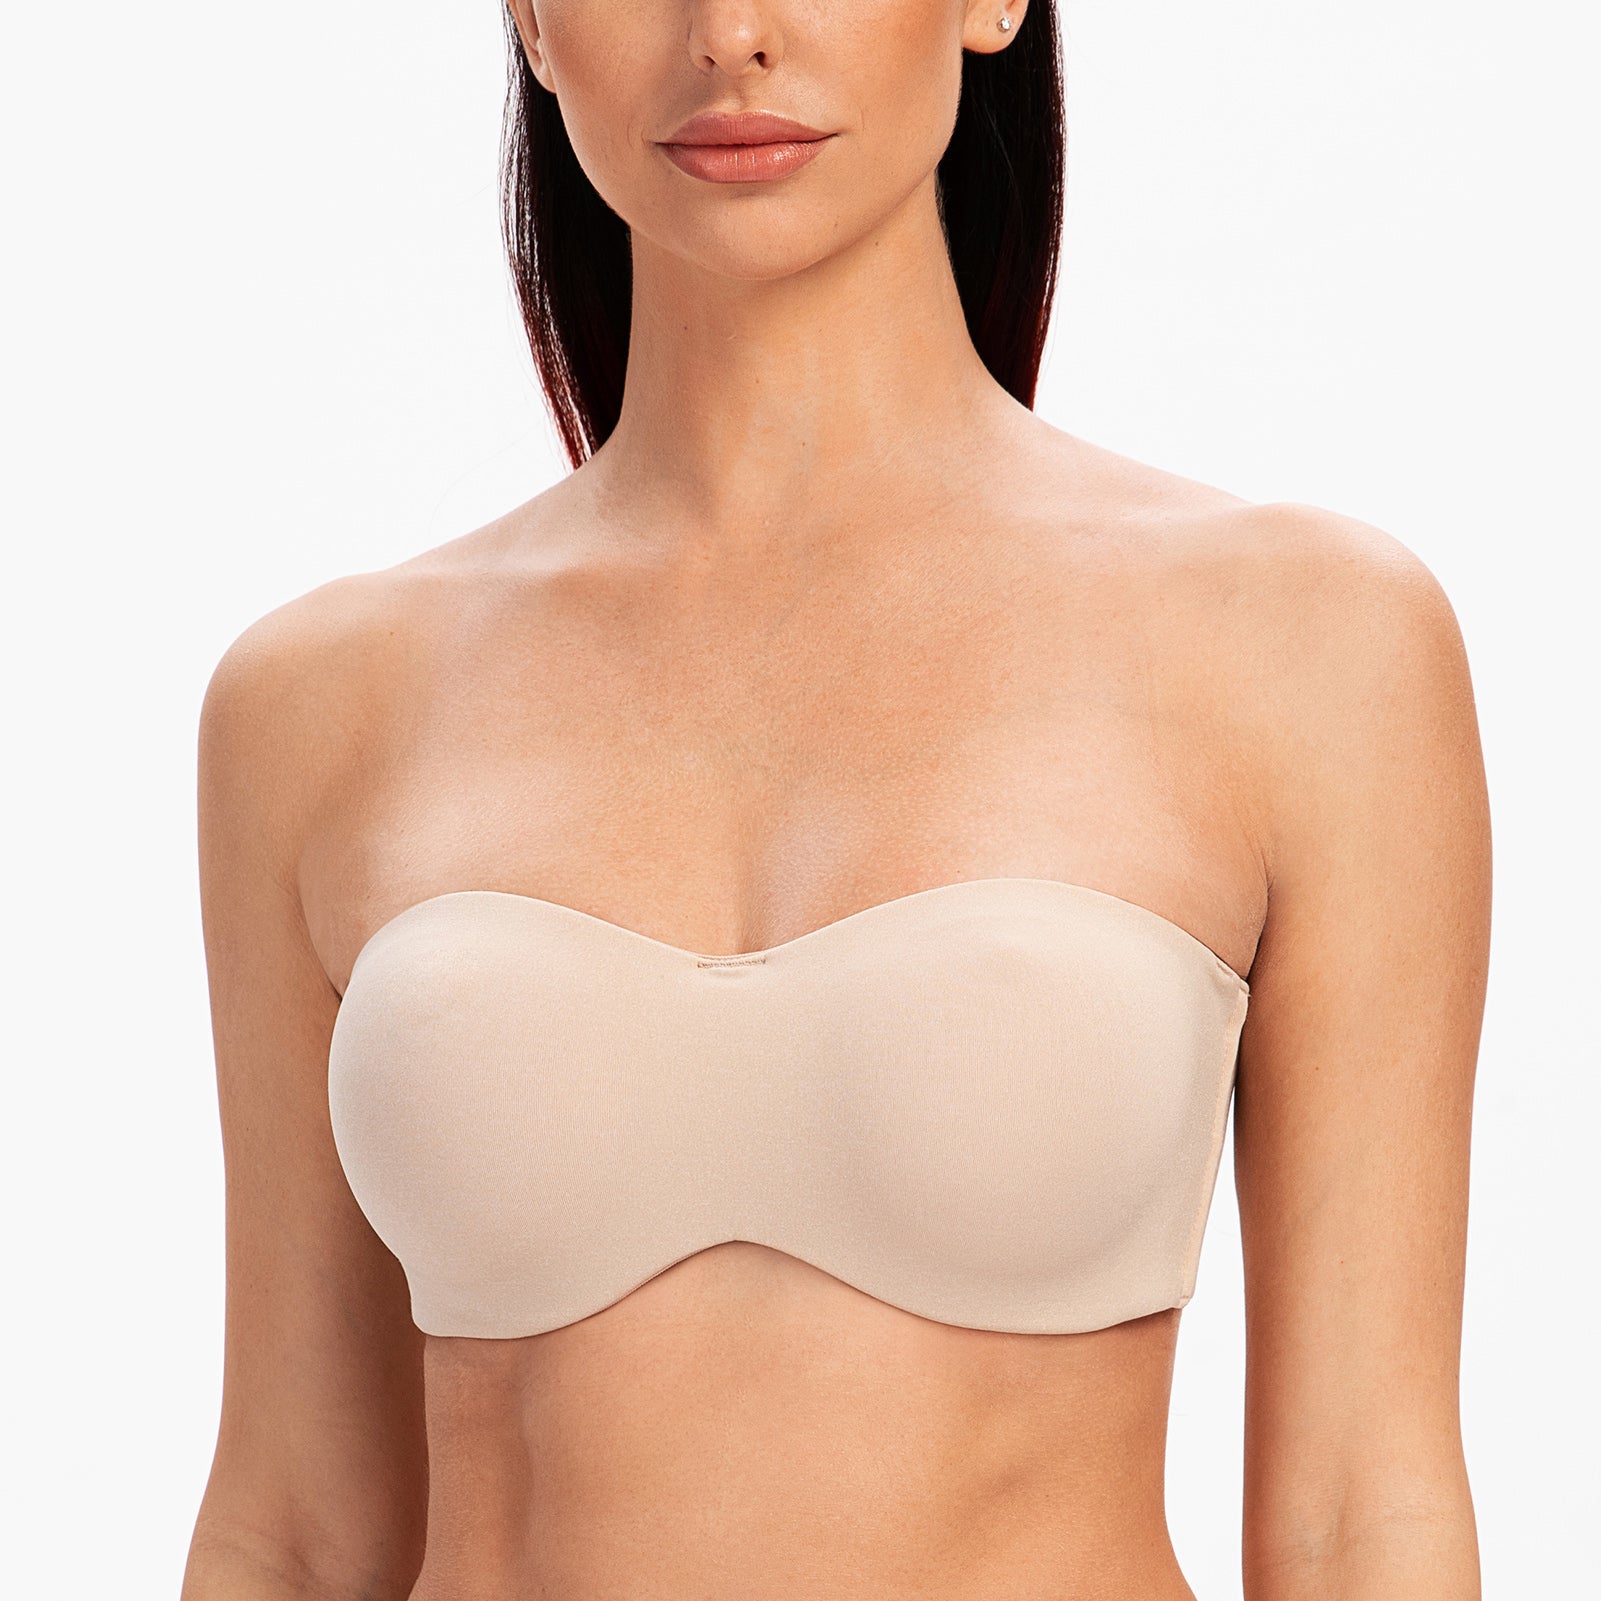  Strapless Bra For Women Unlined Underwire Minimizer Plus  Size Support Seamless Bandeau Bra For Big Busted Taupe 32DD